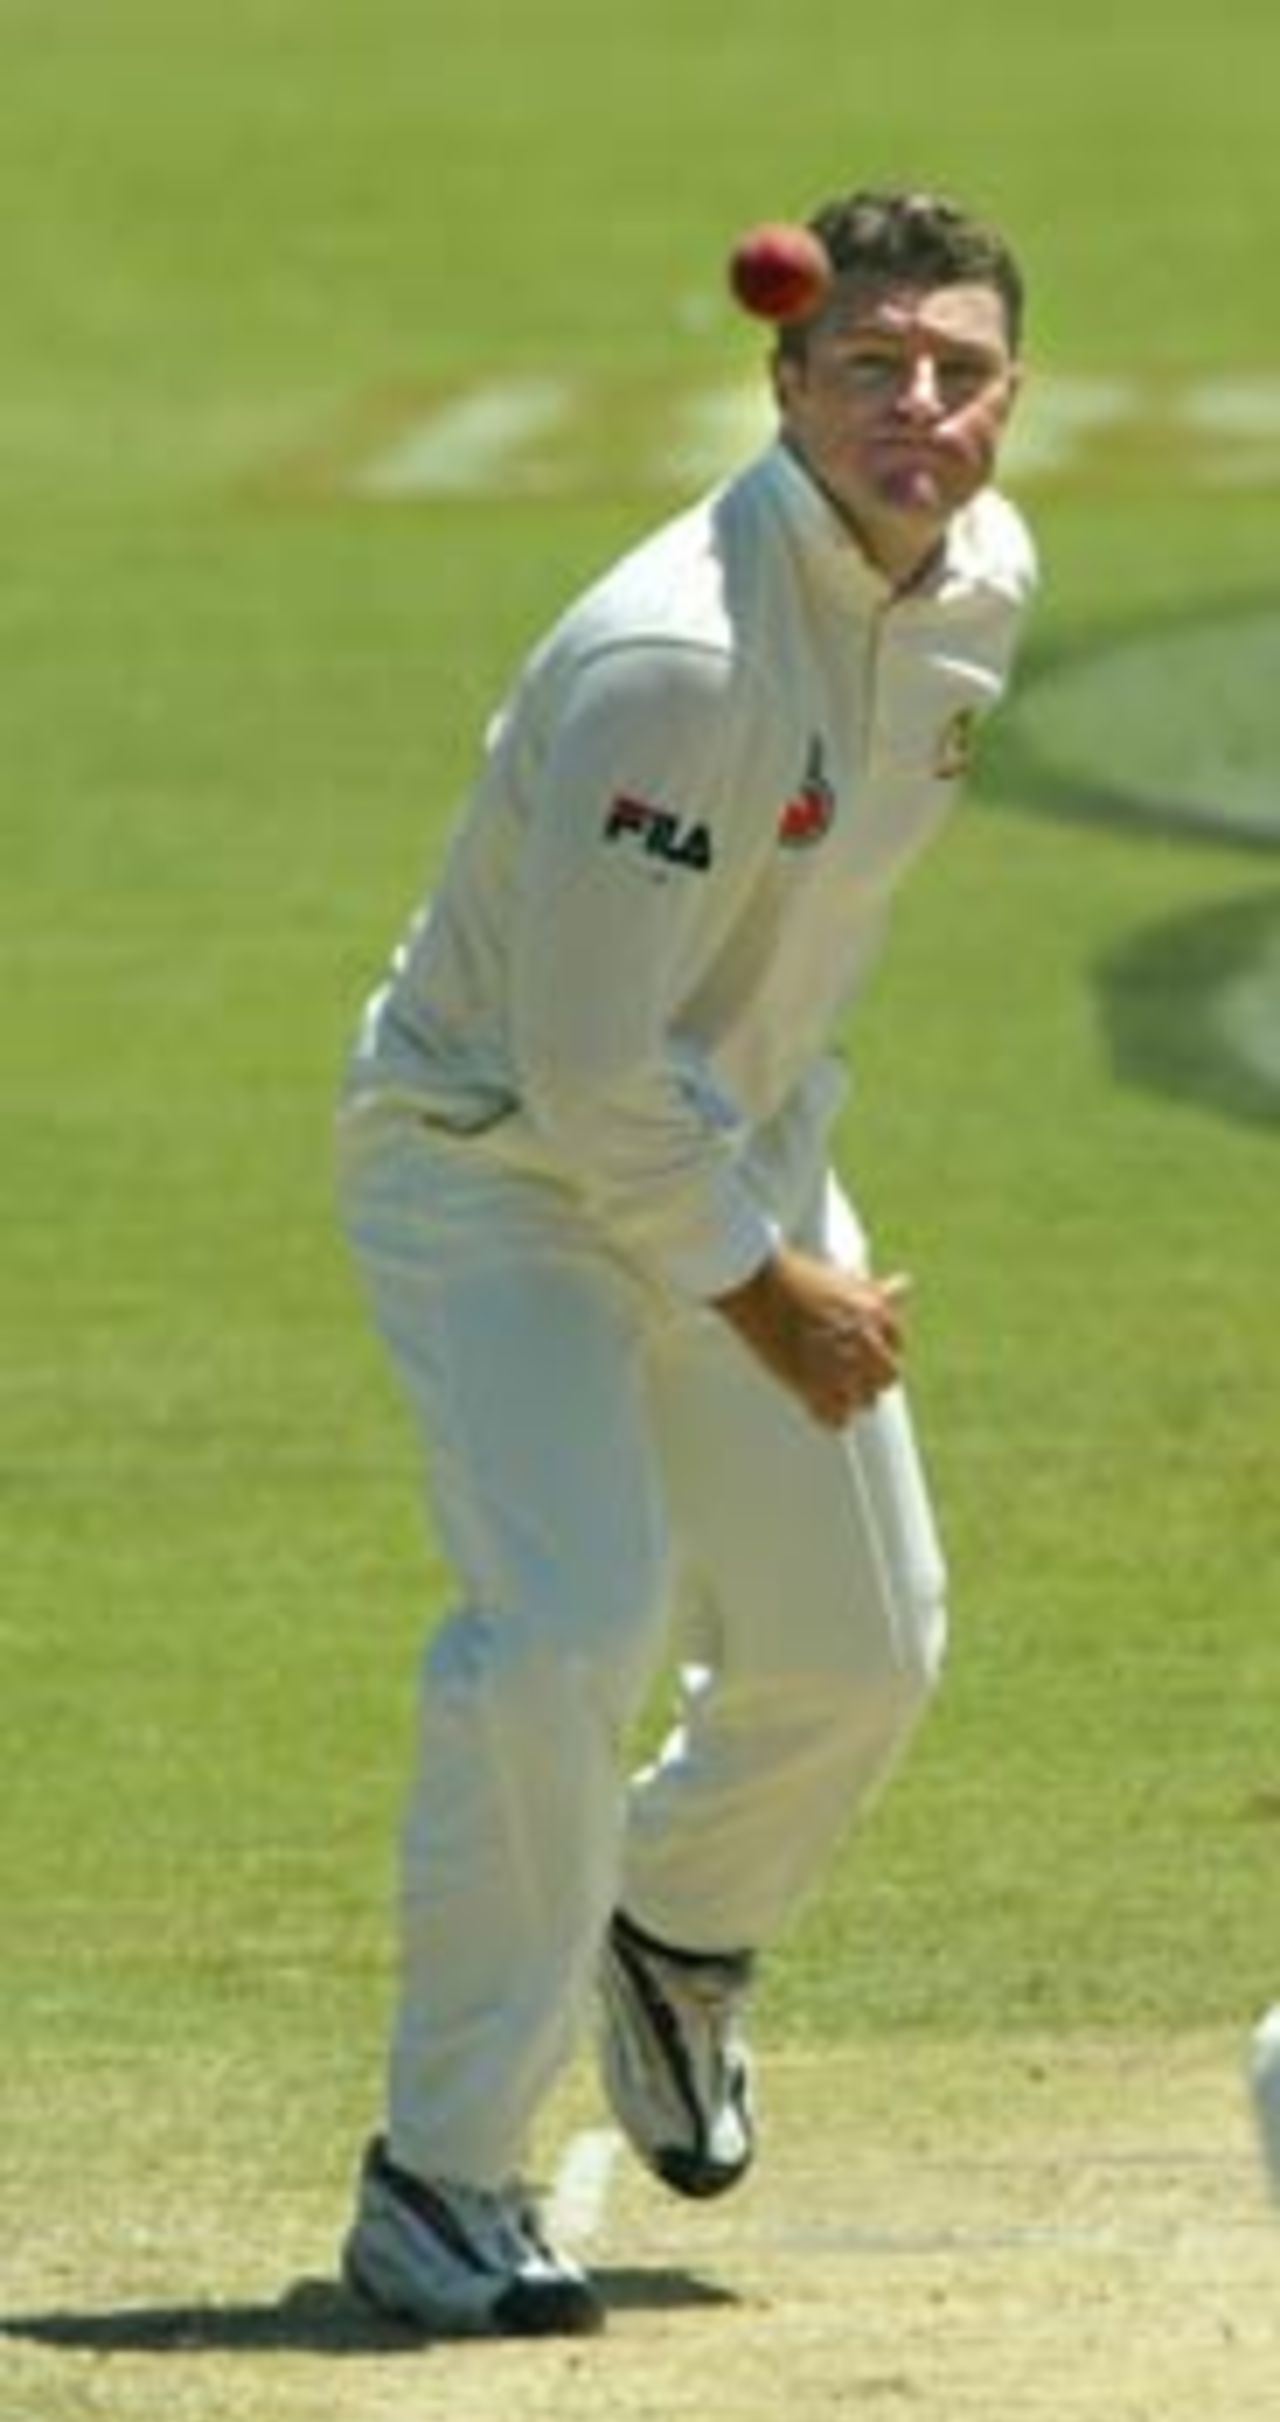 MacGill gave the ball a rip ... Australia v India, 2nd Test, Adelaide, 5th day, December 16, 2003